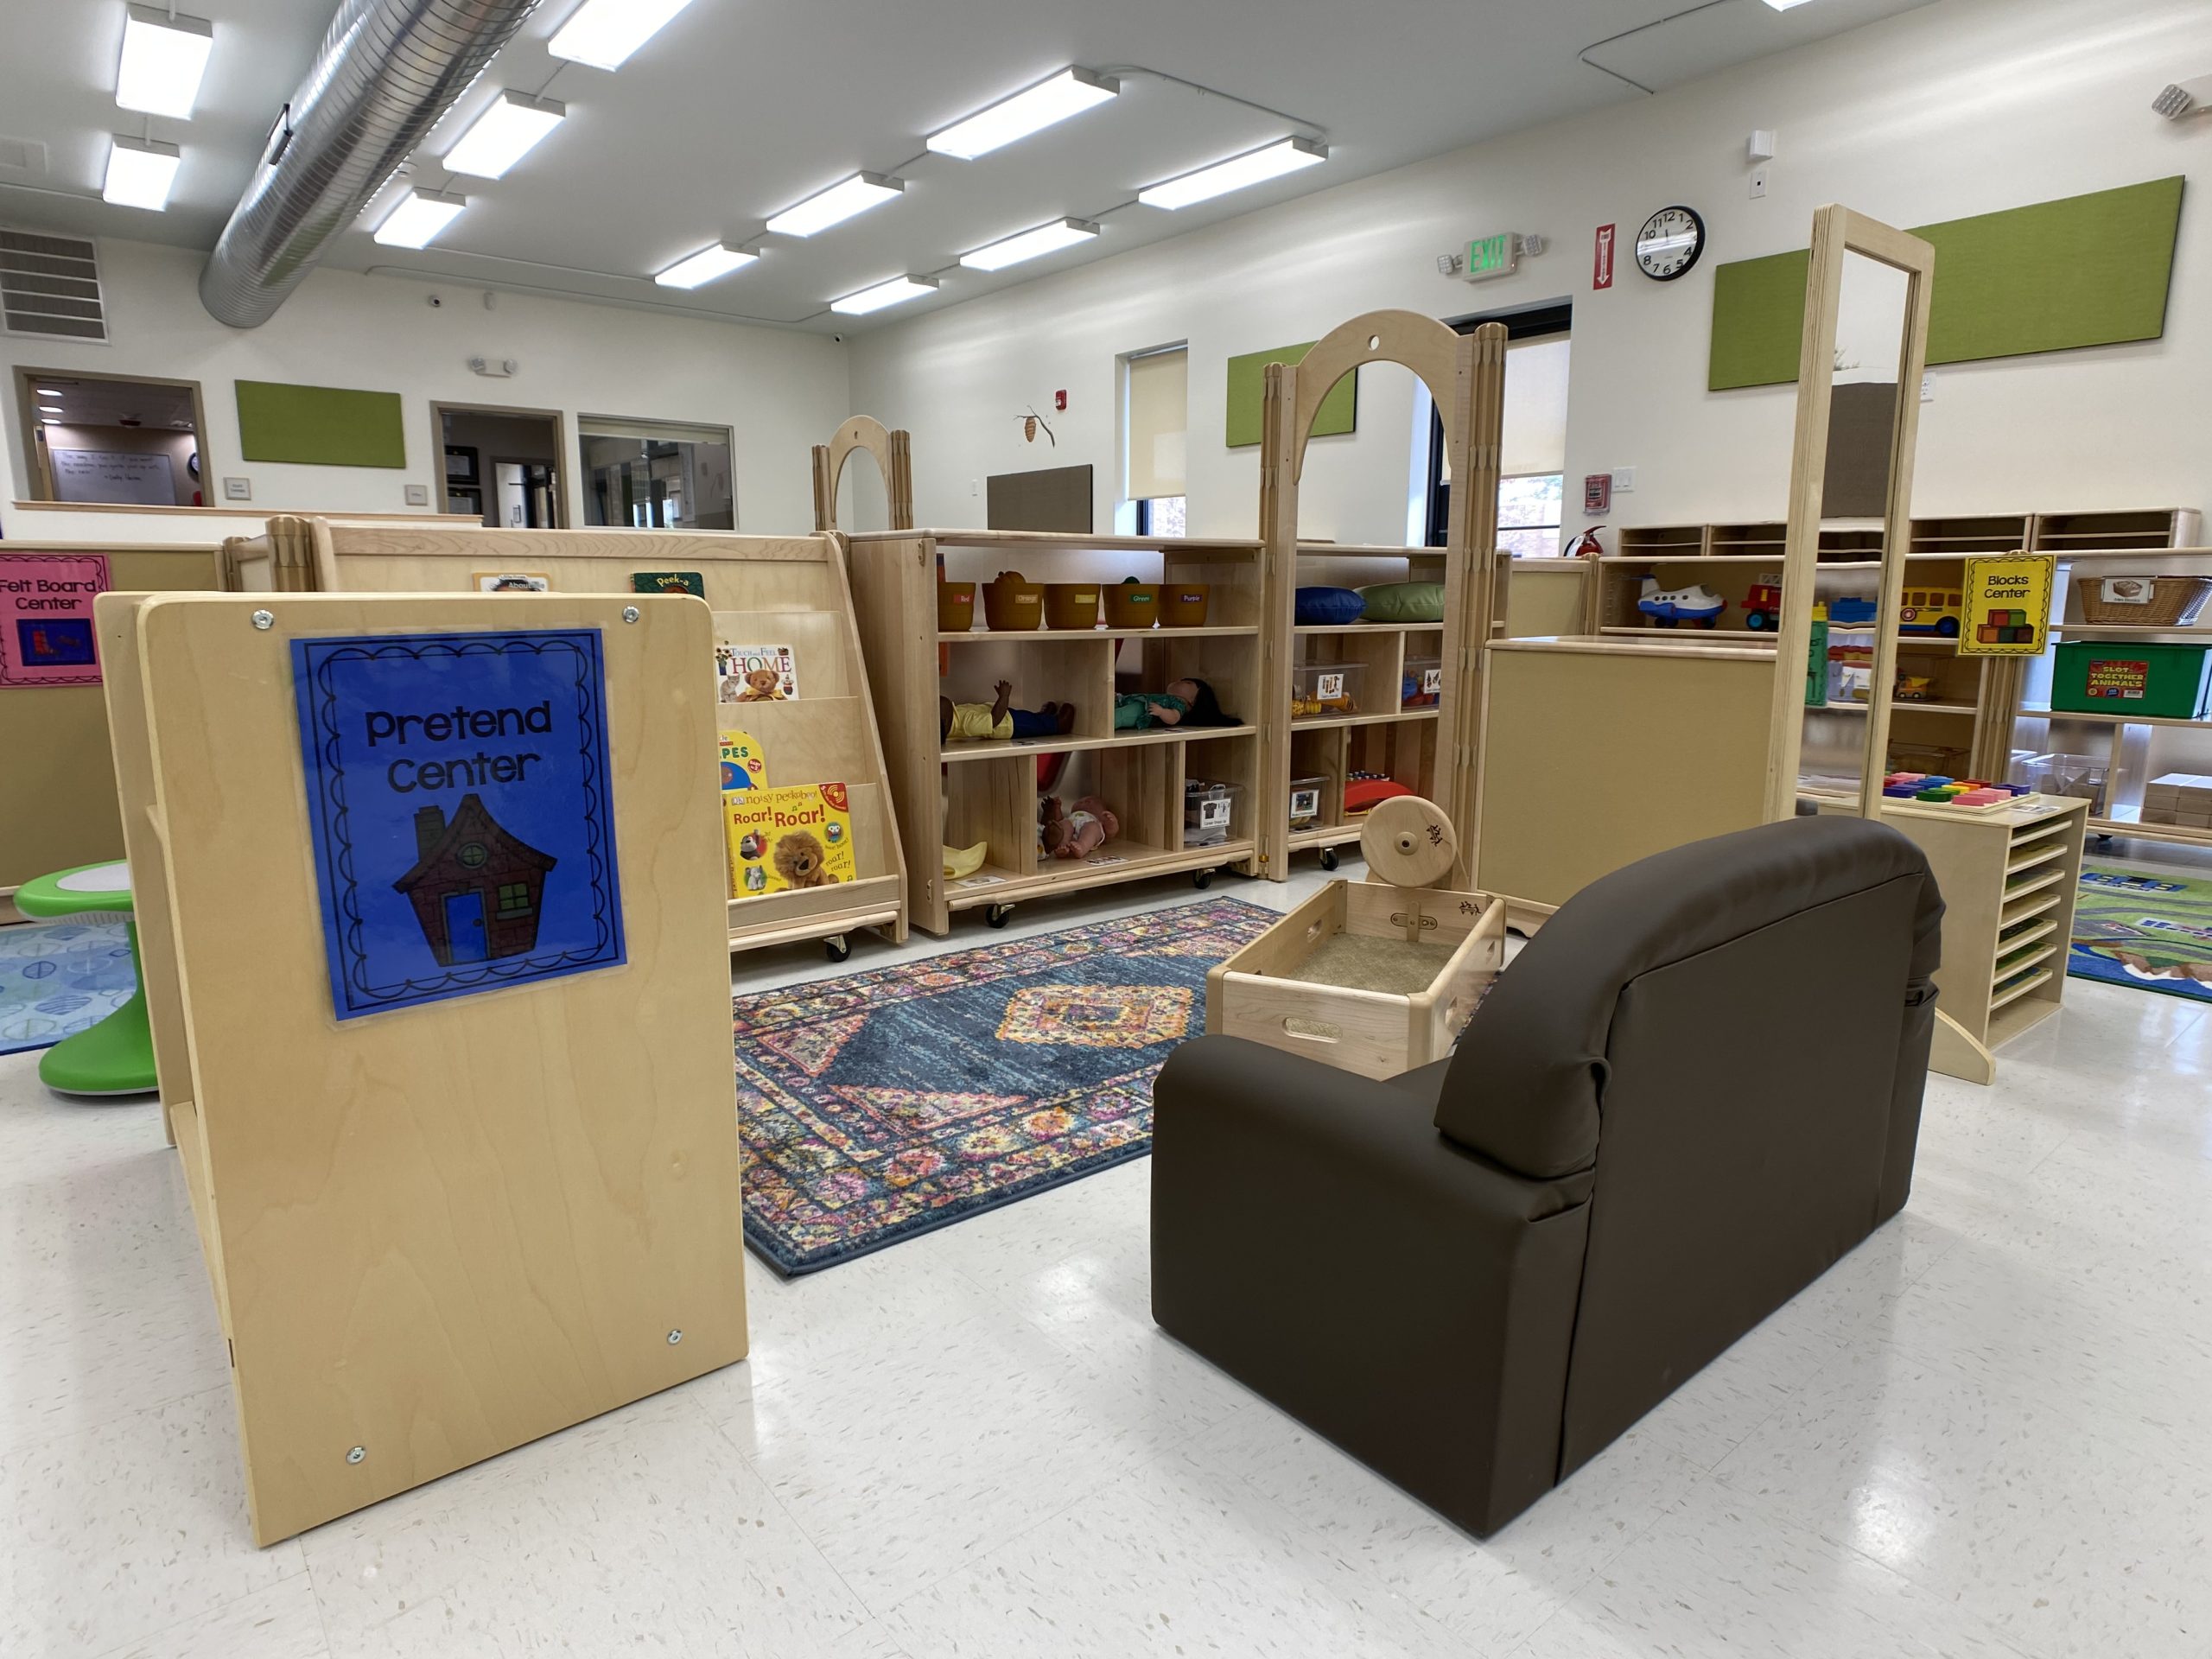 children's learning area - toy and book area with couch